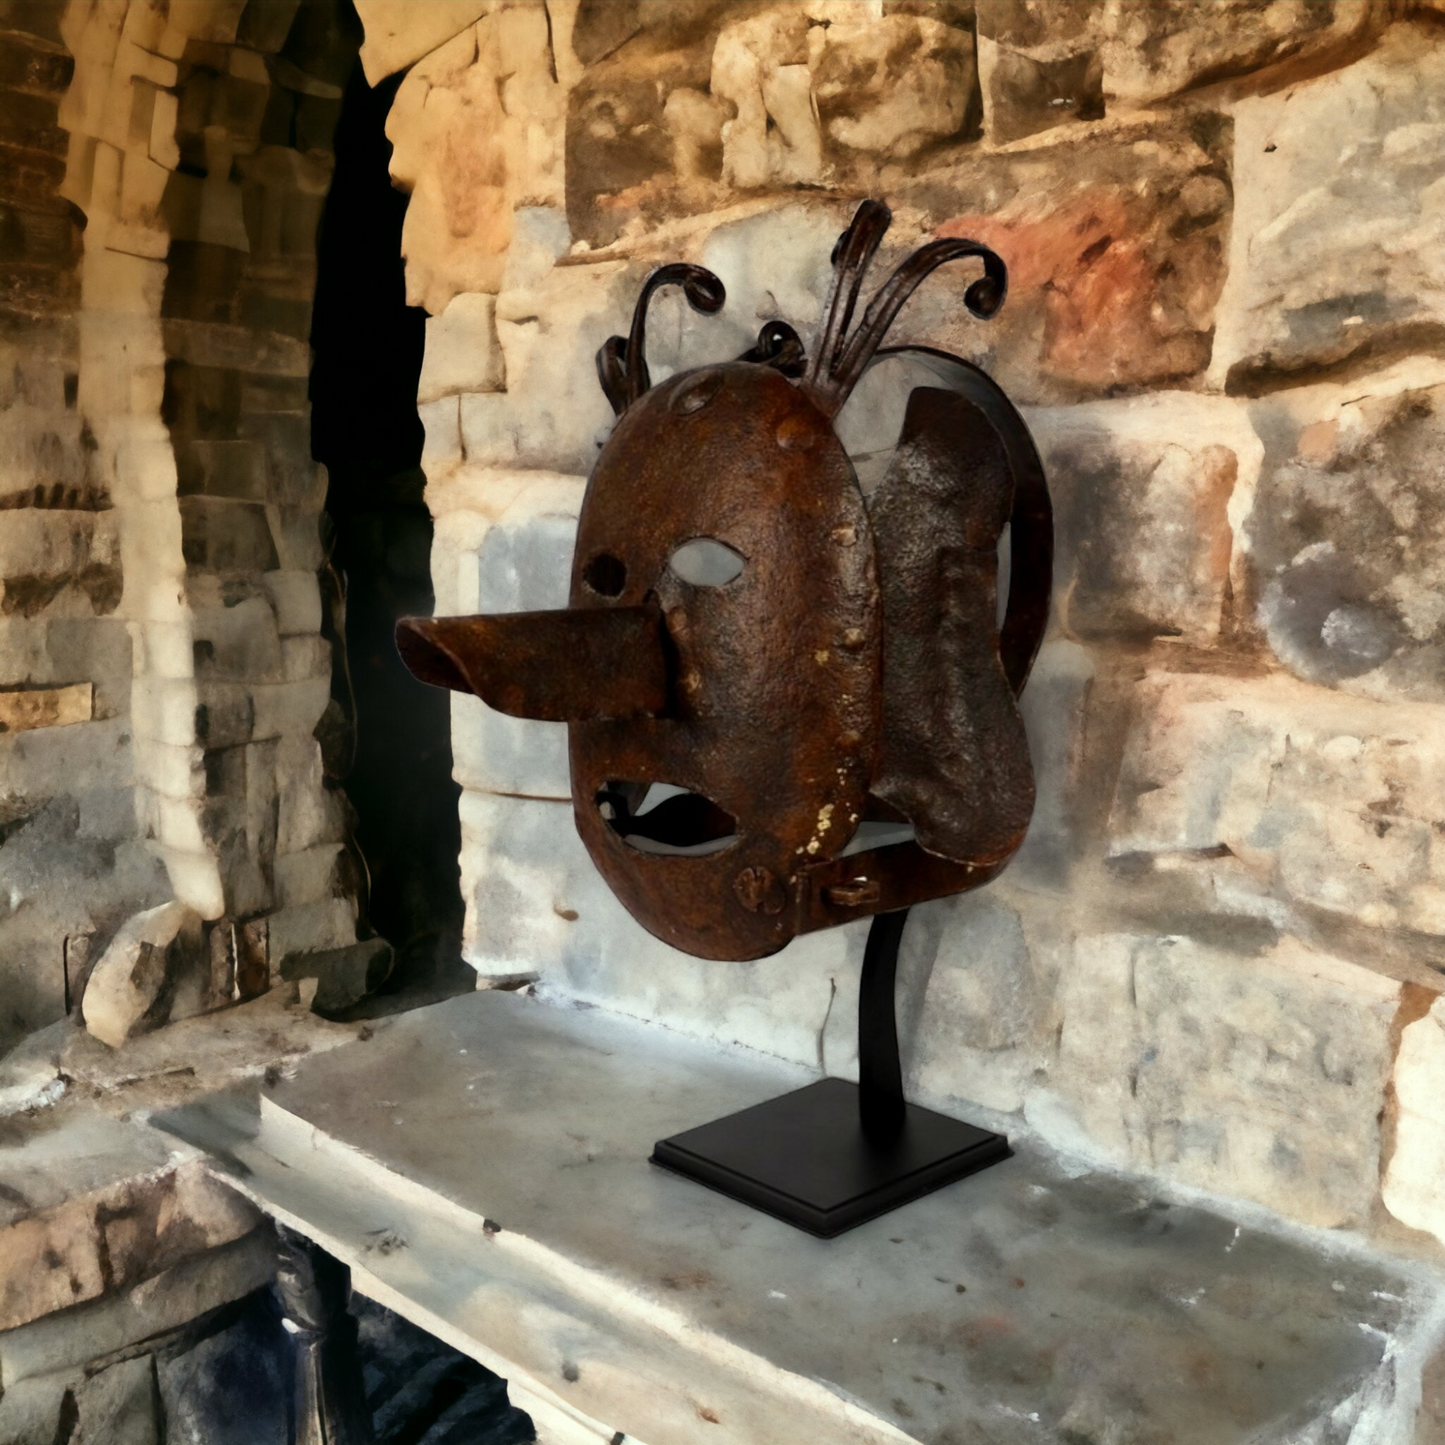 Museum Piece - An Exceptionally Rare 16th Century Scold's Bridle or Brank's Bridle